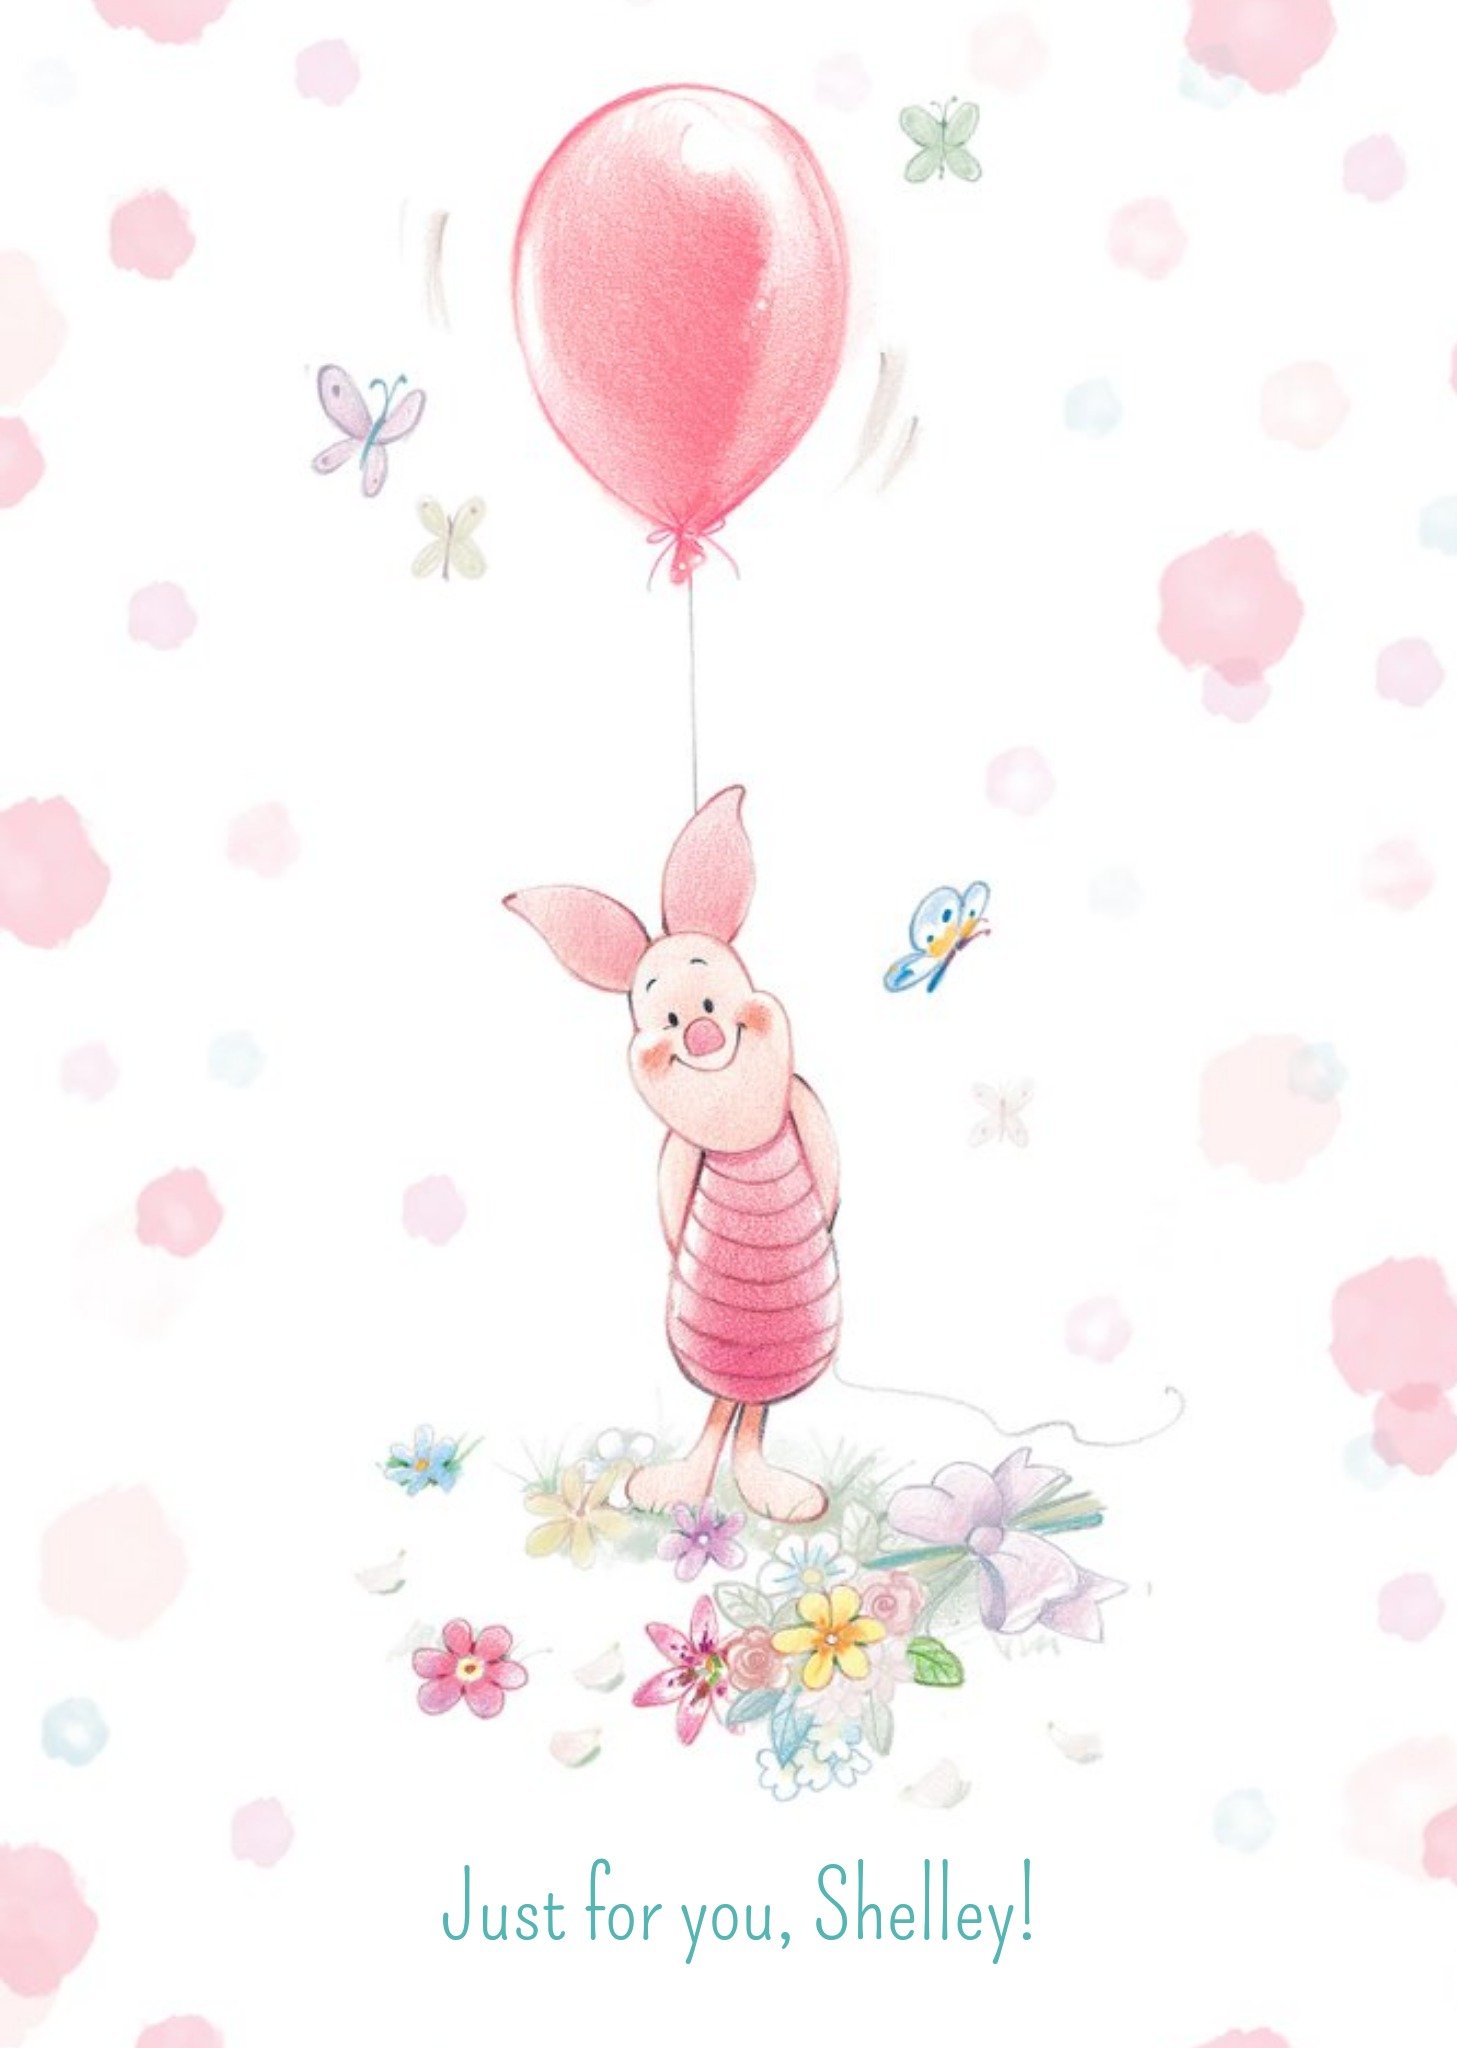 Disney Winnie The Pooh Piglet With Balloon Just For You Card, Large